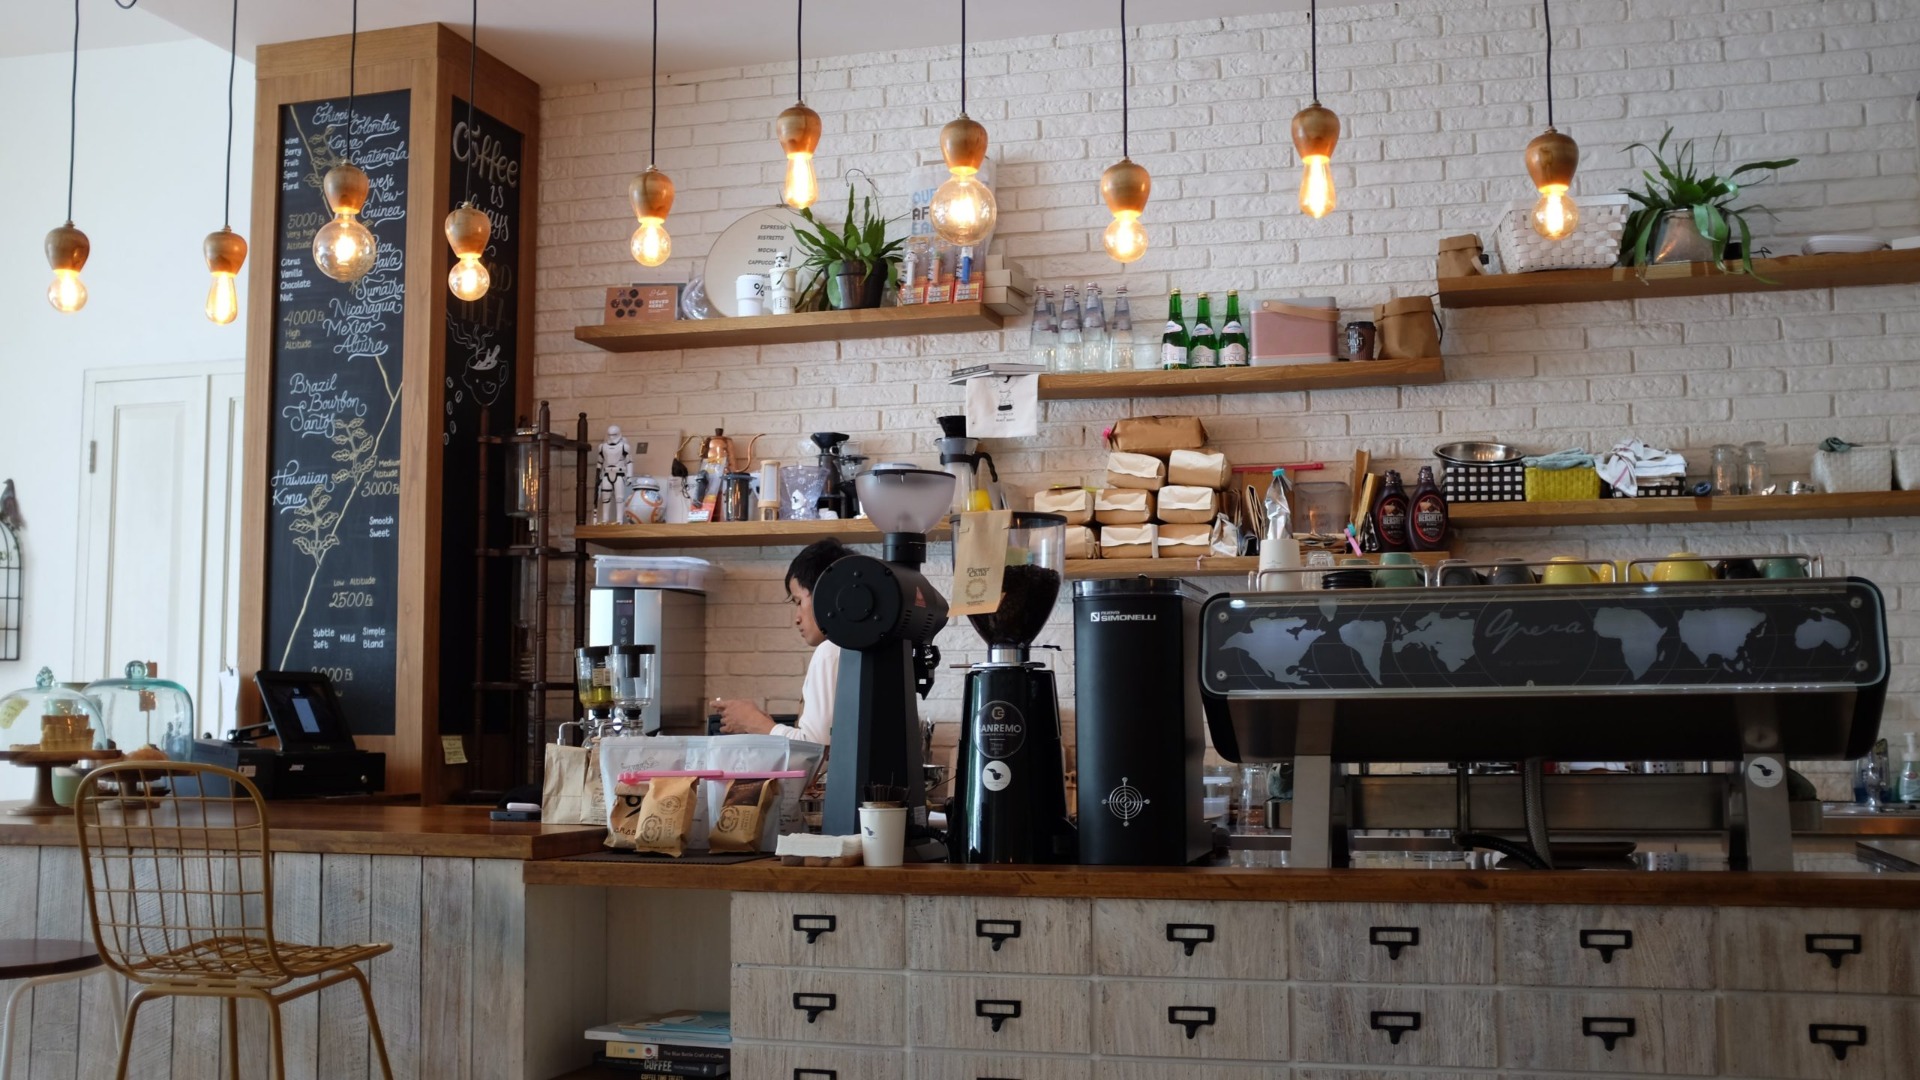 3 Great Reasons to Support Your Local Coffee Shop